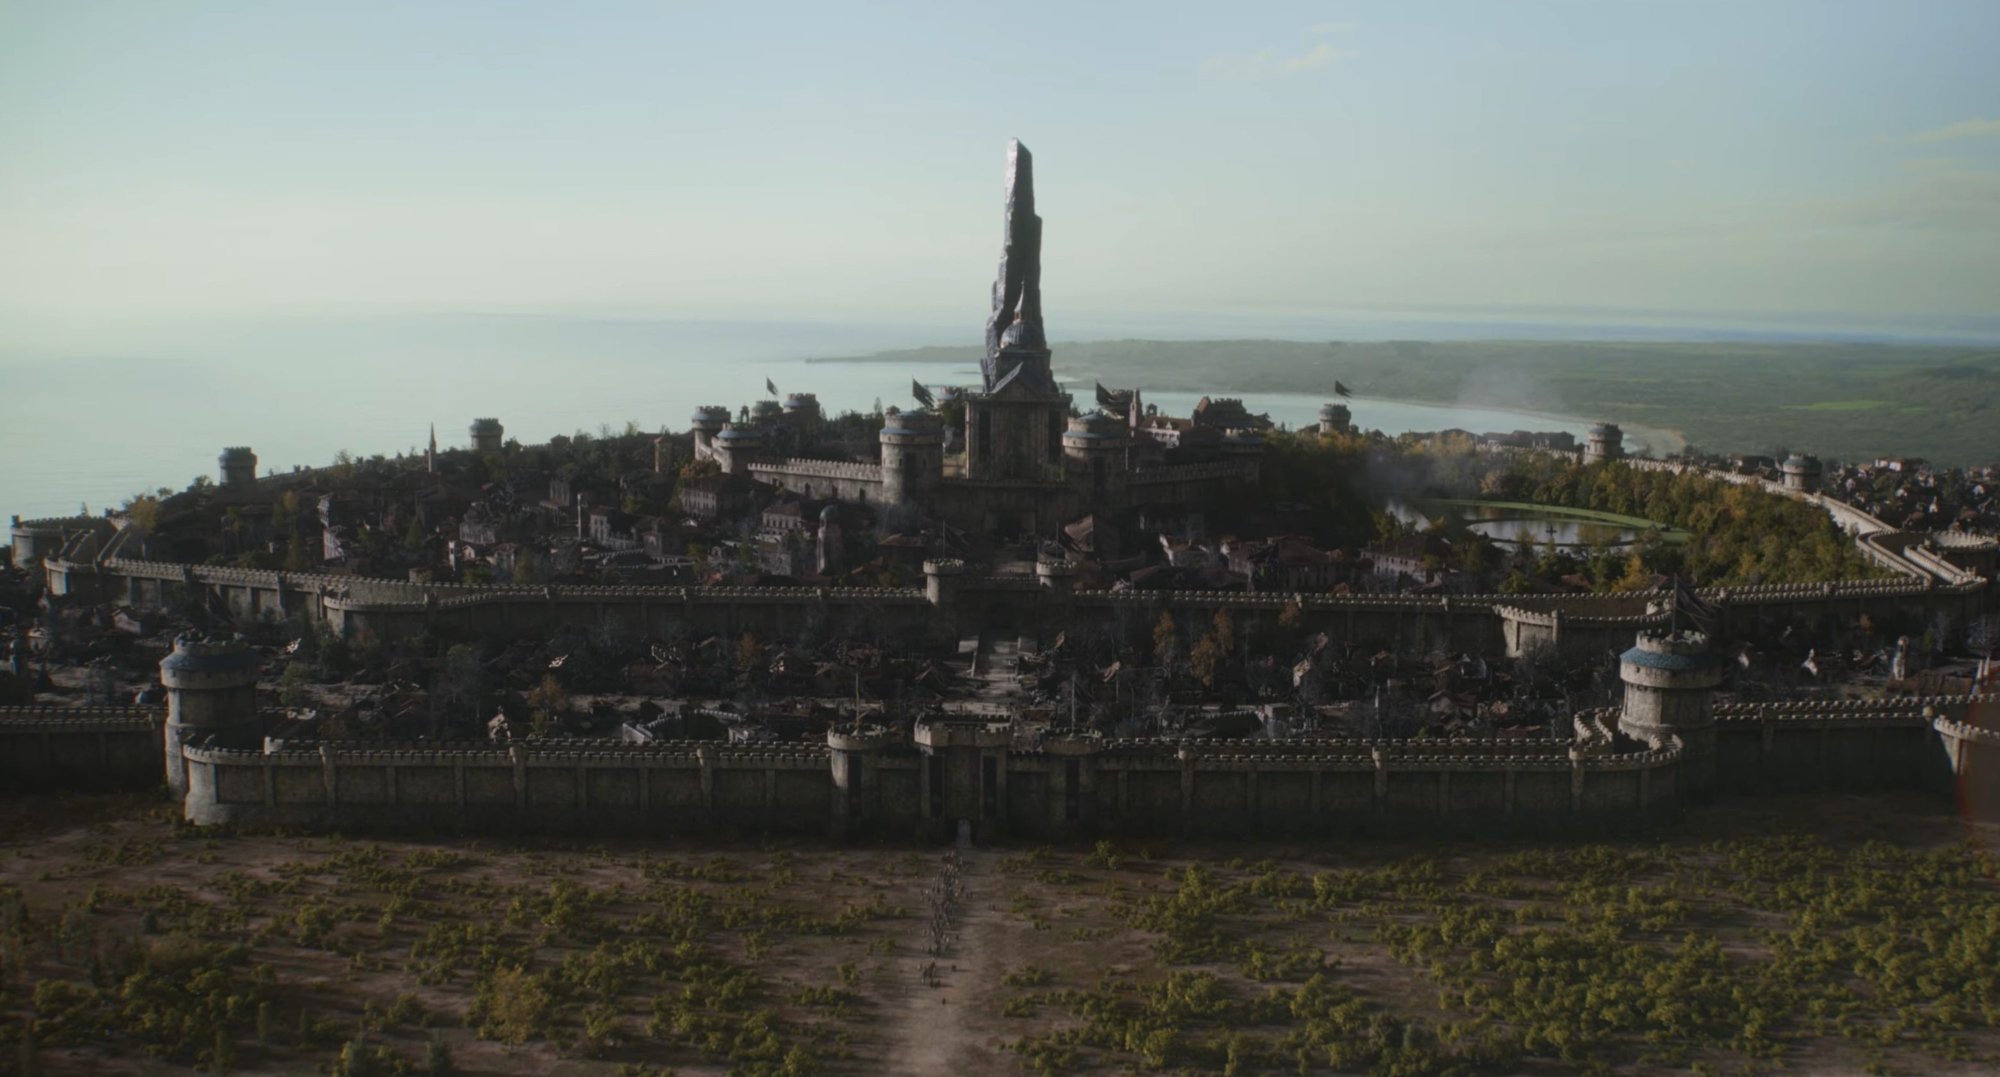 The elven kingdom of Xin'trea in 'The Witcher: Blood Origin.'